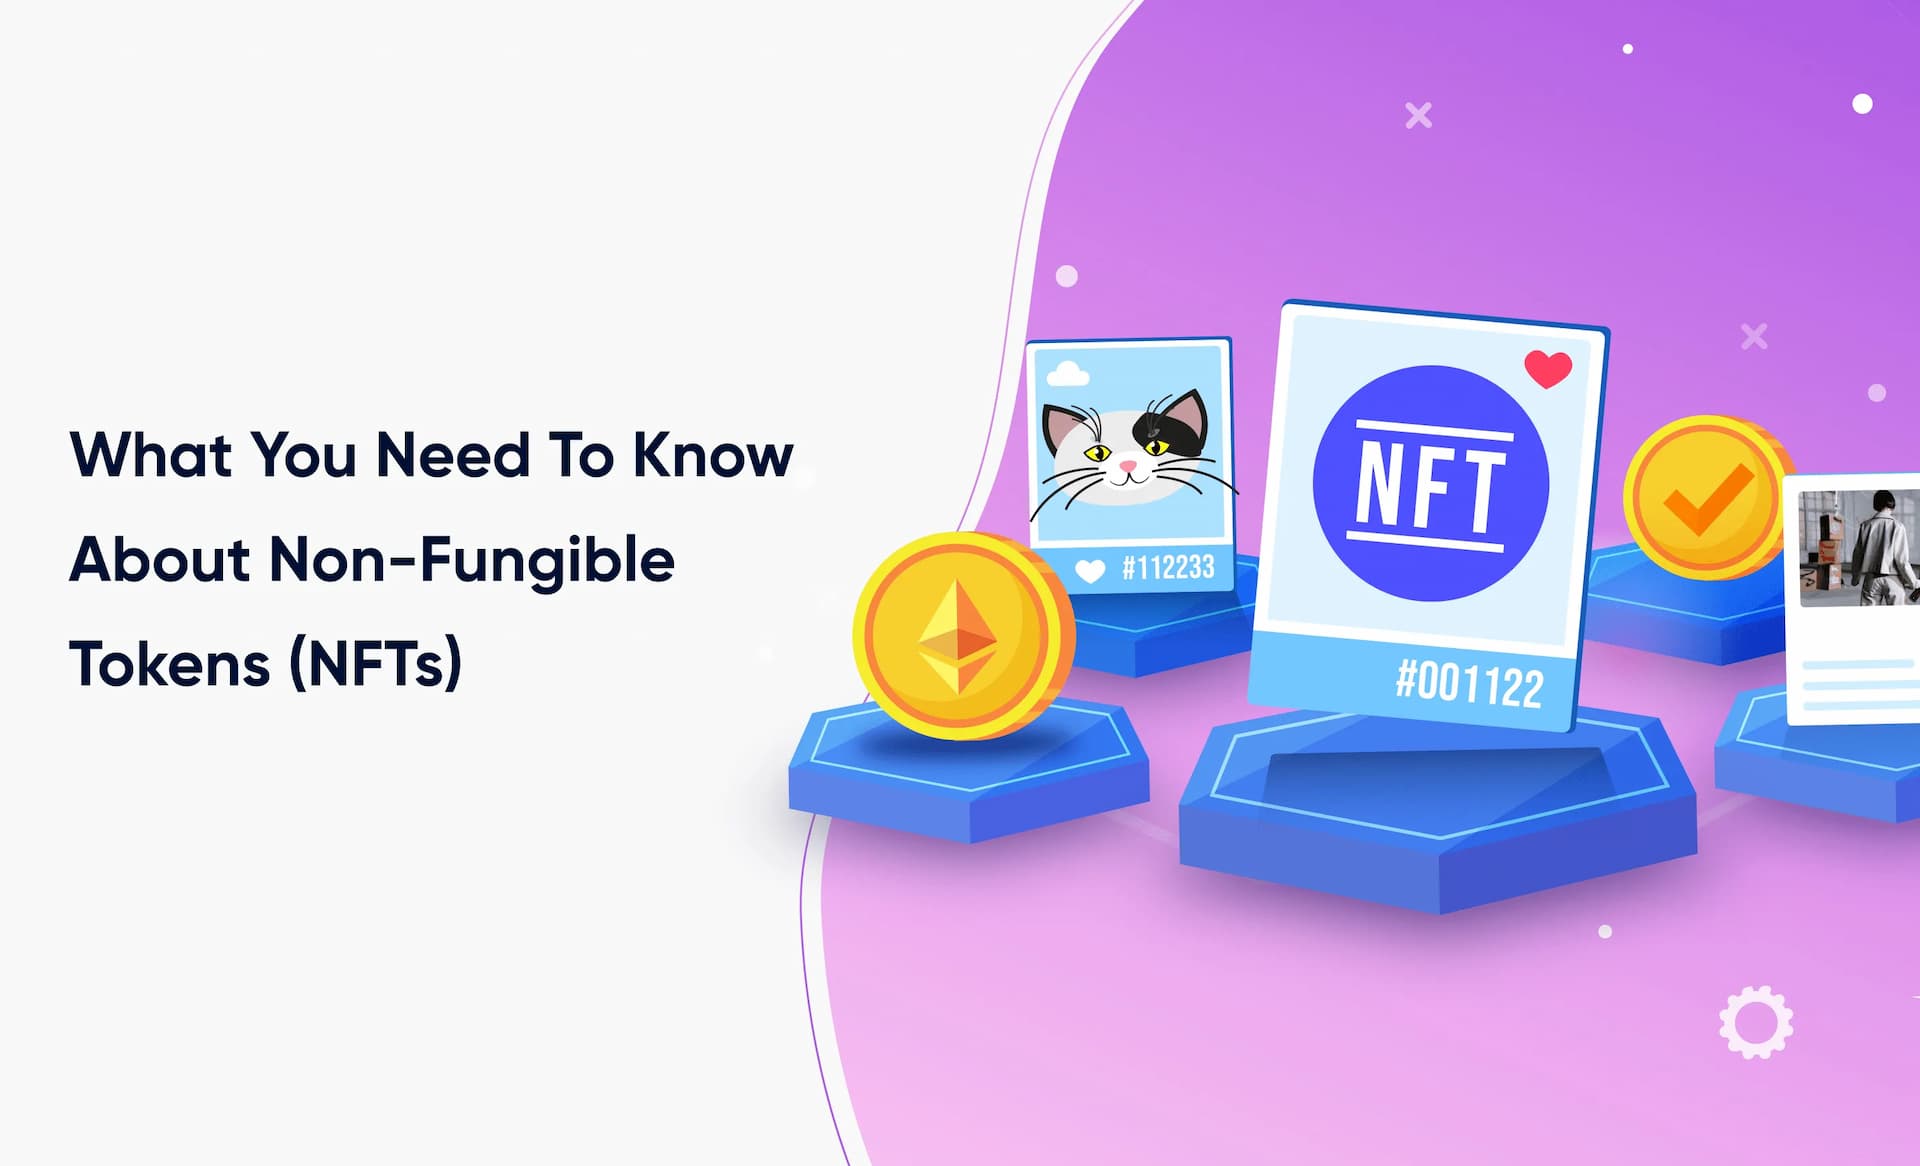 What You Need To Know About Non-Fungible Tokens (NFTs)